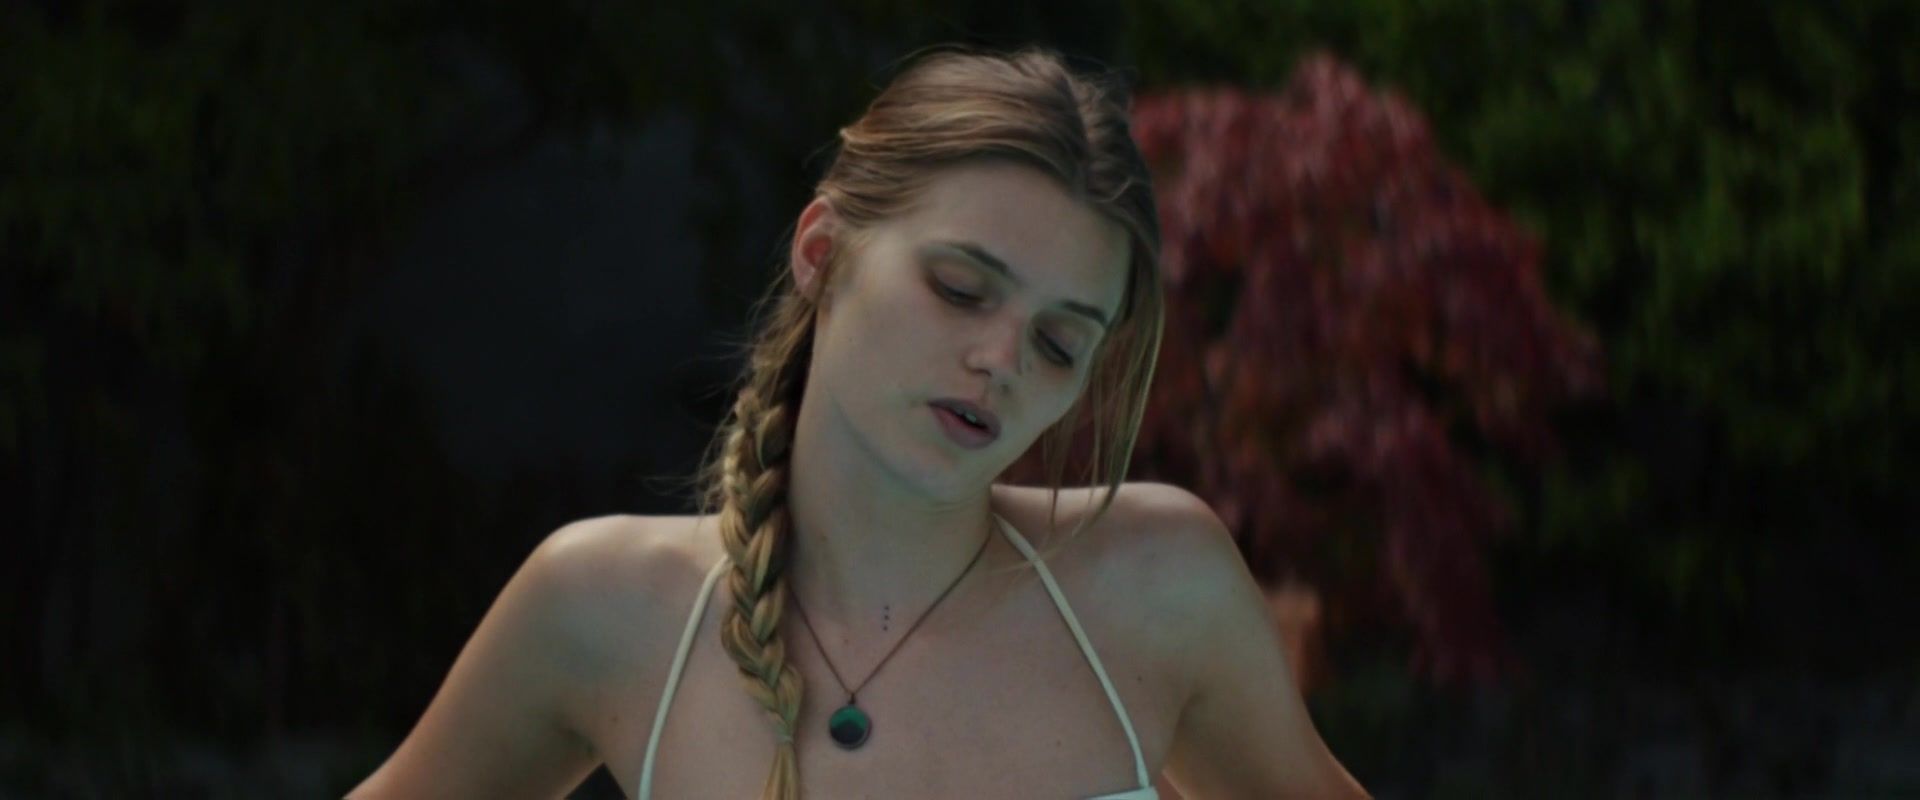 Interracial Hardcore Abbey Lee, Riley Keough nude - Welcome The Stranger (2018) Shoplifter